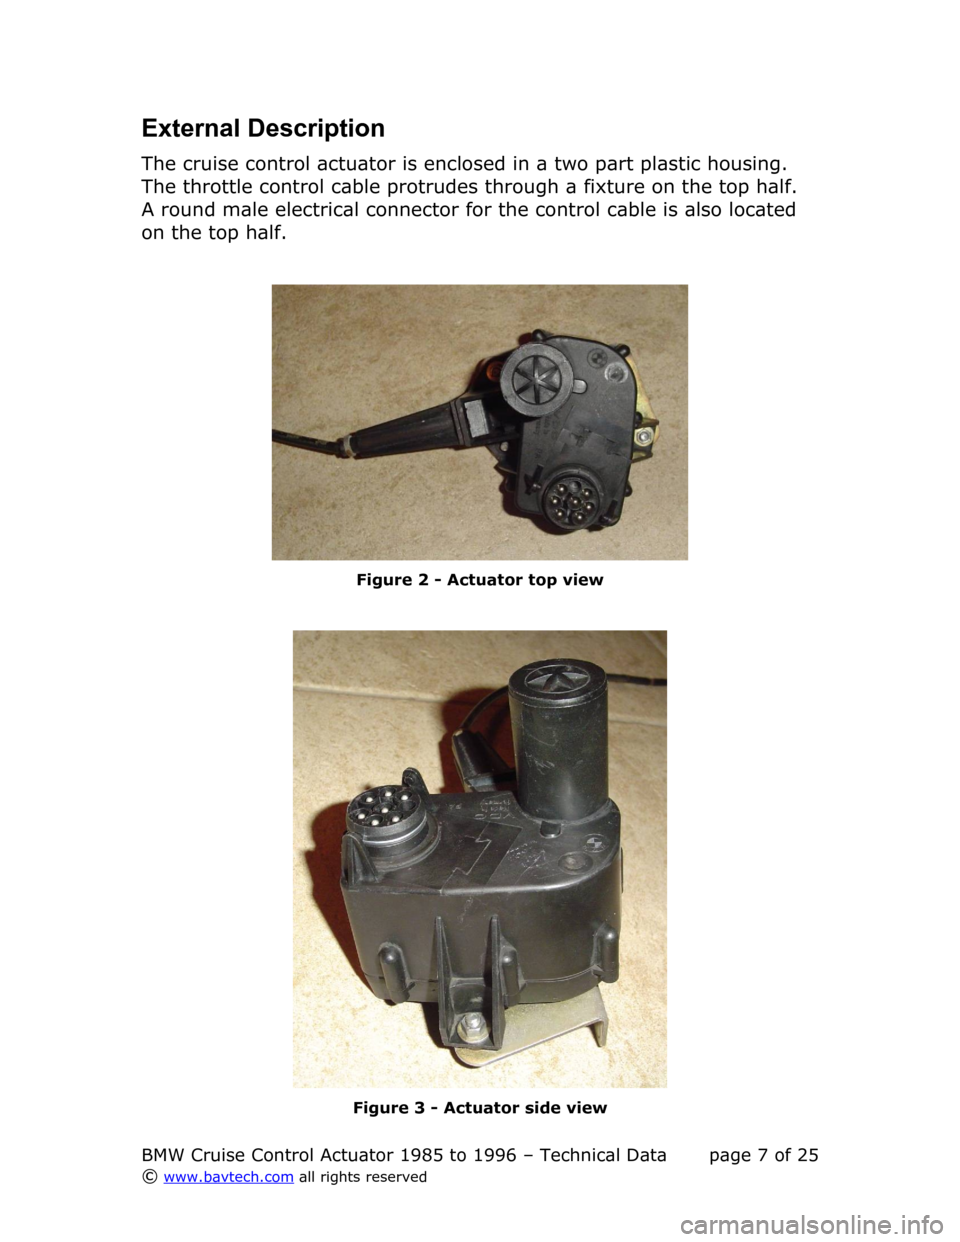 BMW 7 SERIES 1992 E32 Cruise Control Acutator External Description
The cruise control actuator is enclosed in a two part plastic housing.  
The throttle control cable protrudes through a fixture on the top half.  
A round male electrical connecto